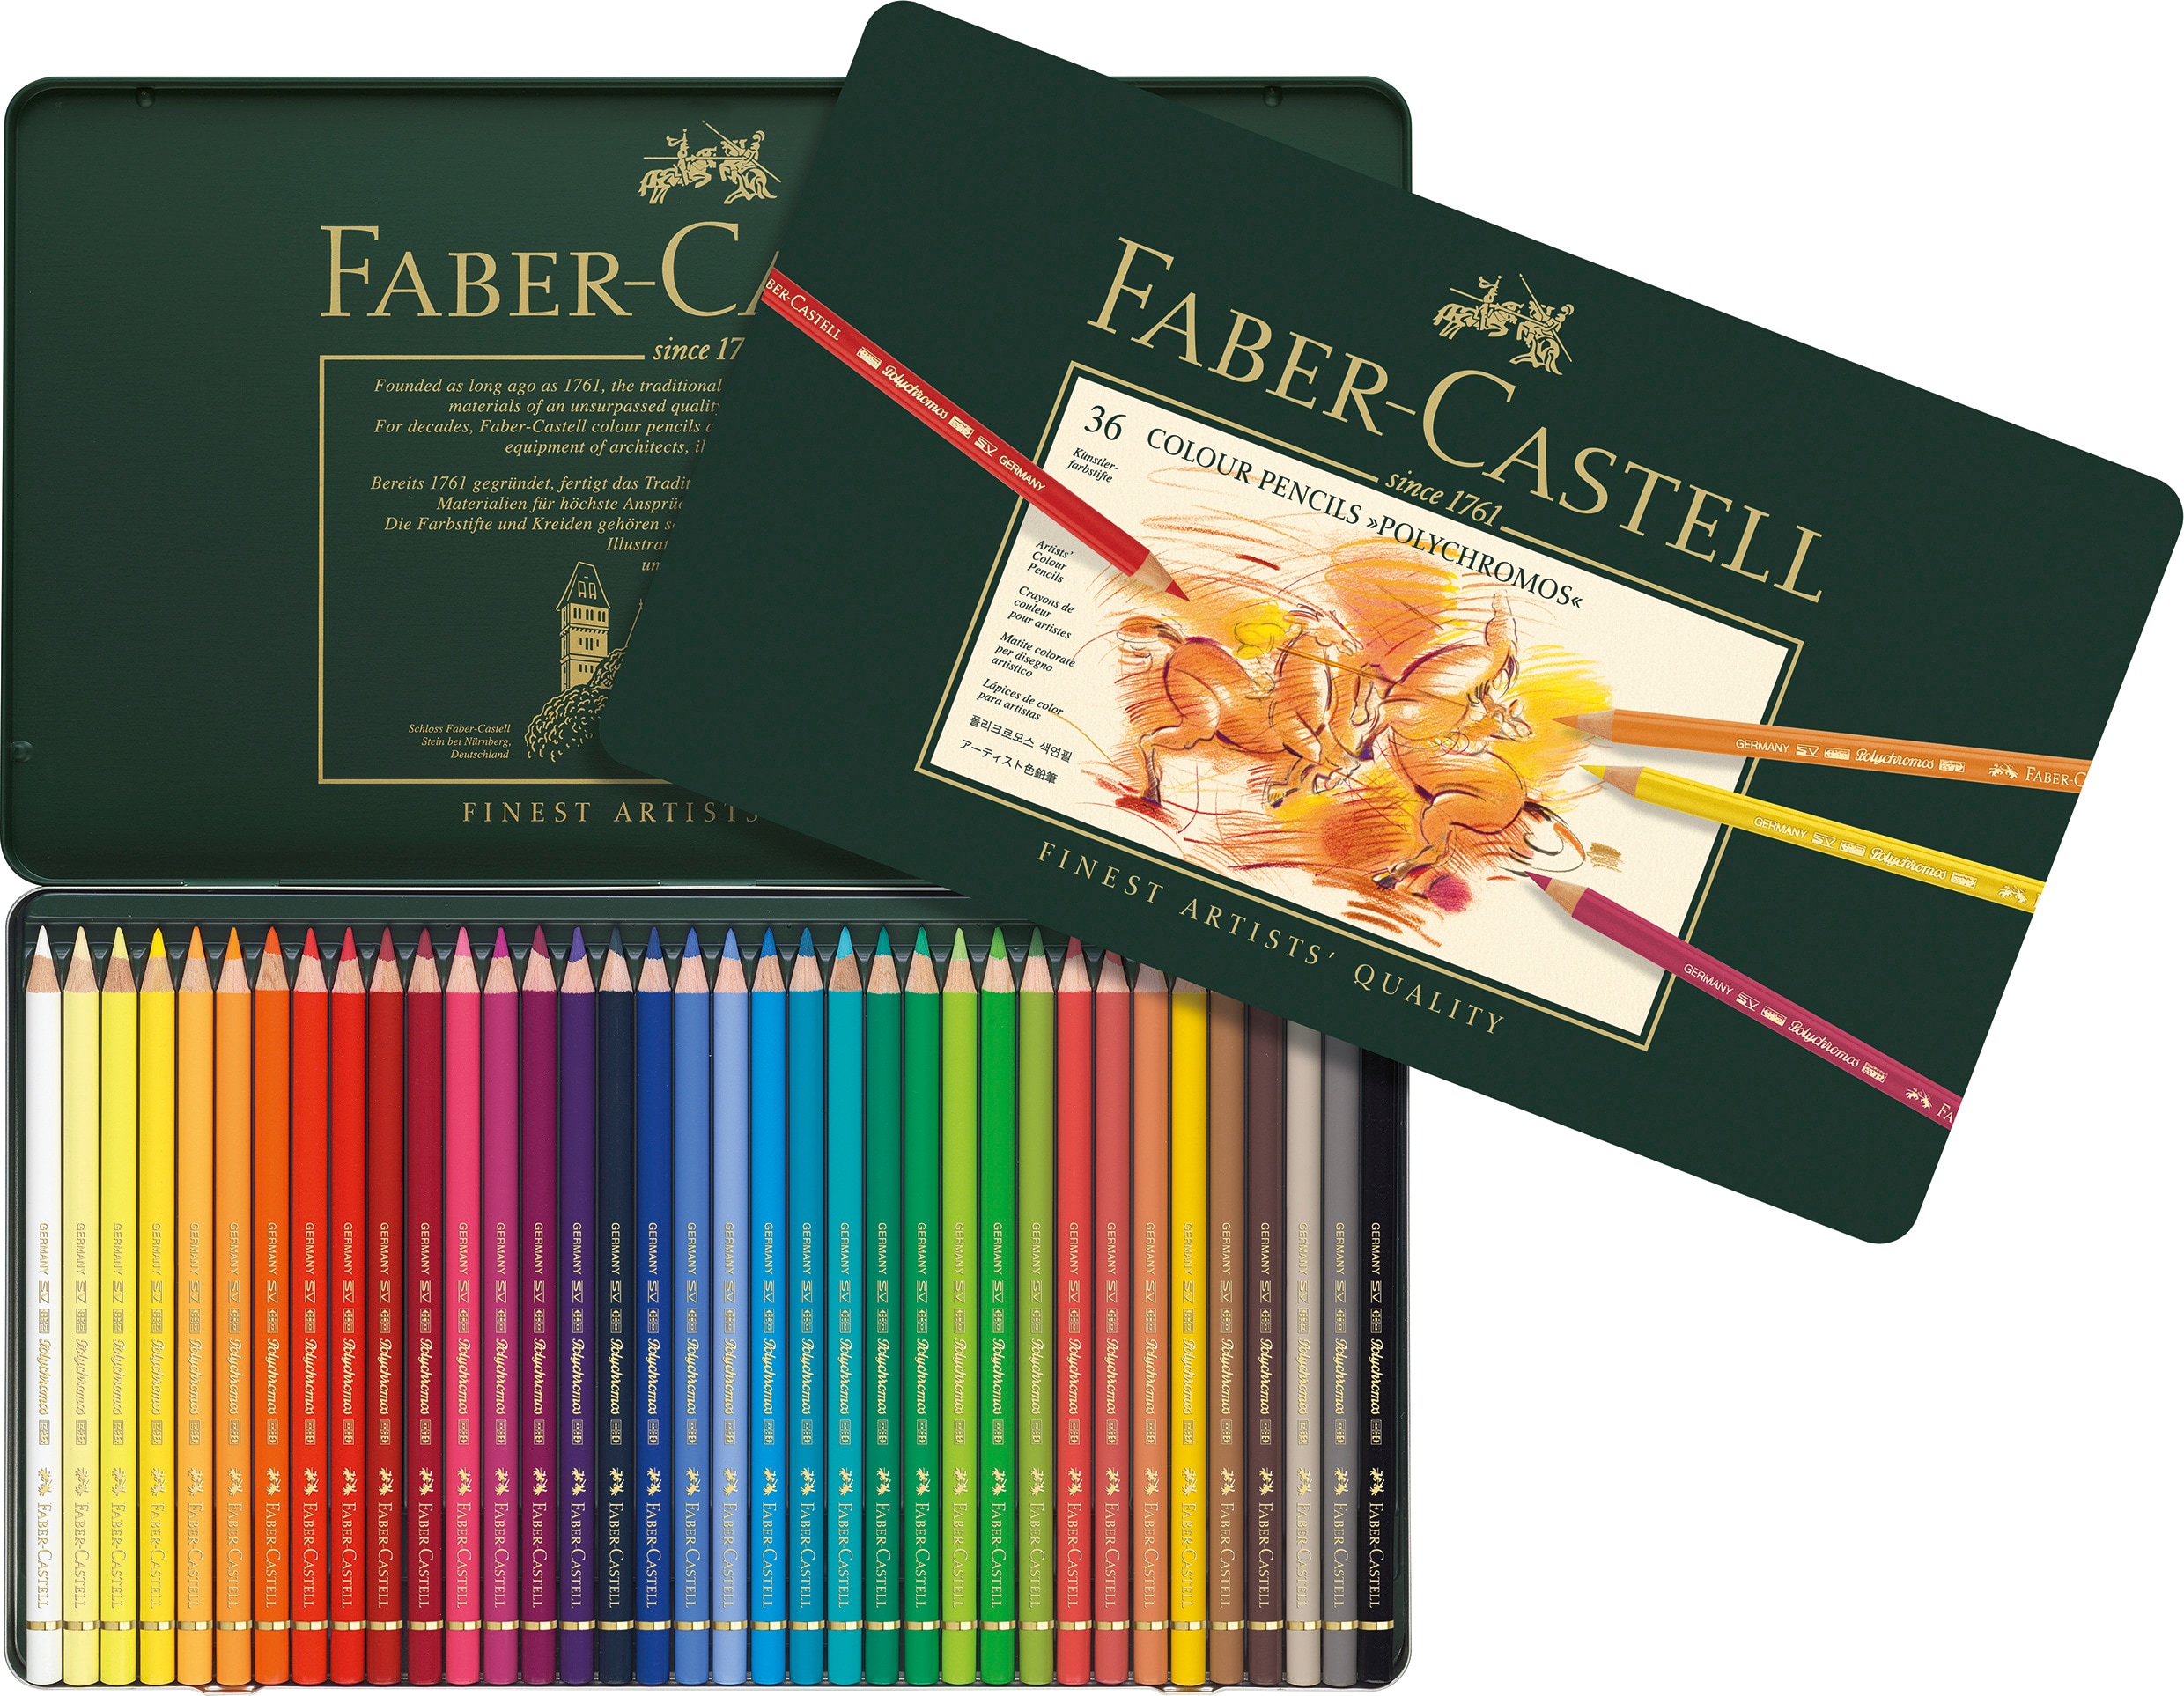 Faber-Castell Polychromos Artist Colored Pencils Set - Premium Quality Polychromos Colored Pencils 120 Tin Gift Set Includes Pencil Sharpener